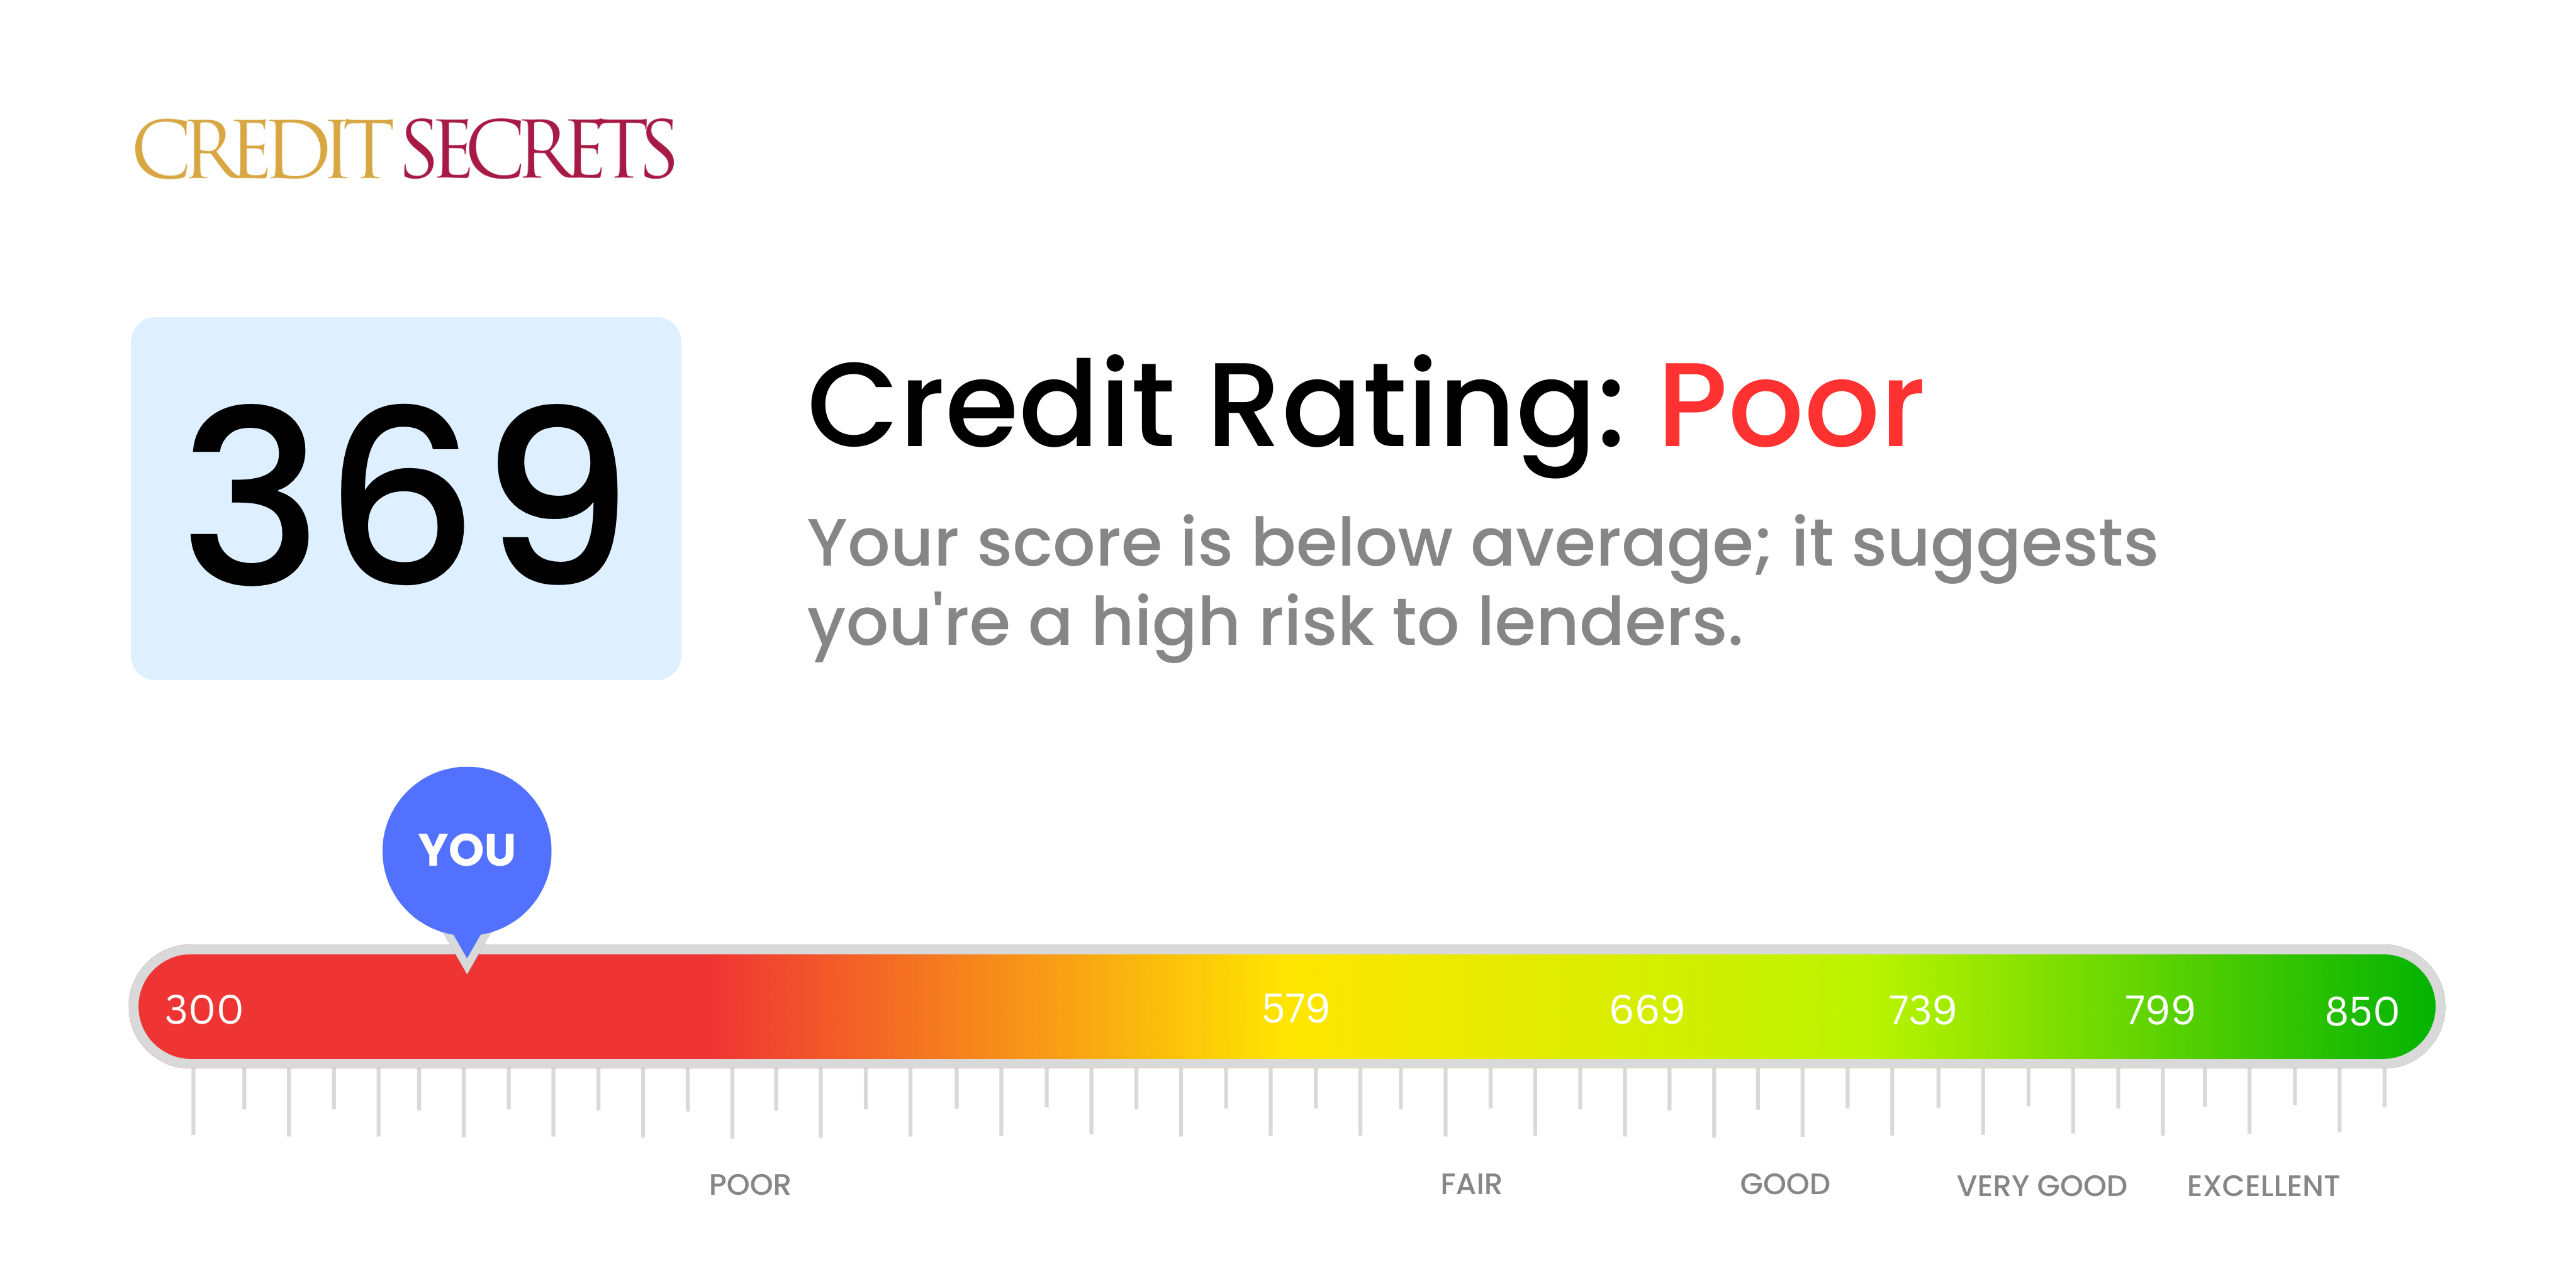 Is 369 a good credit score?